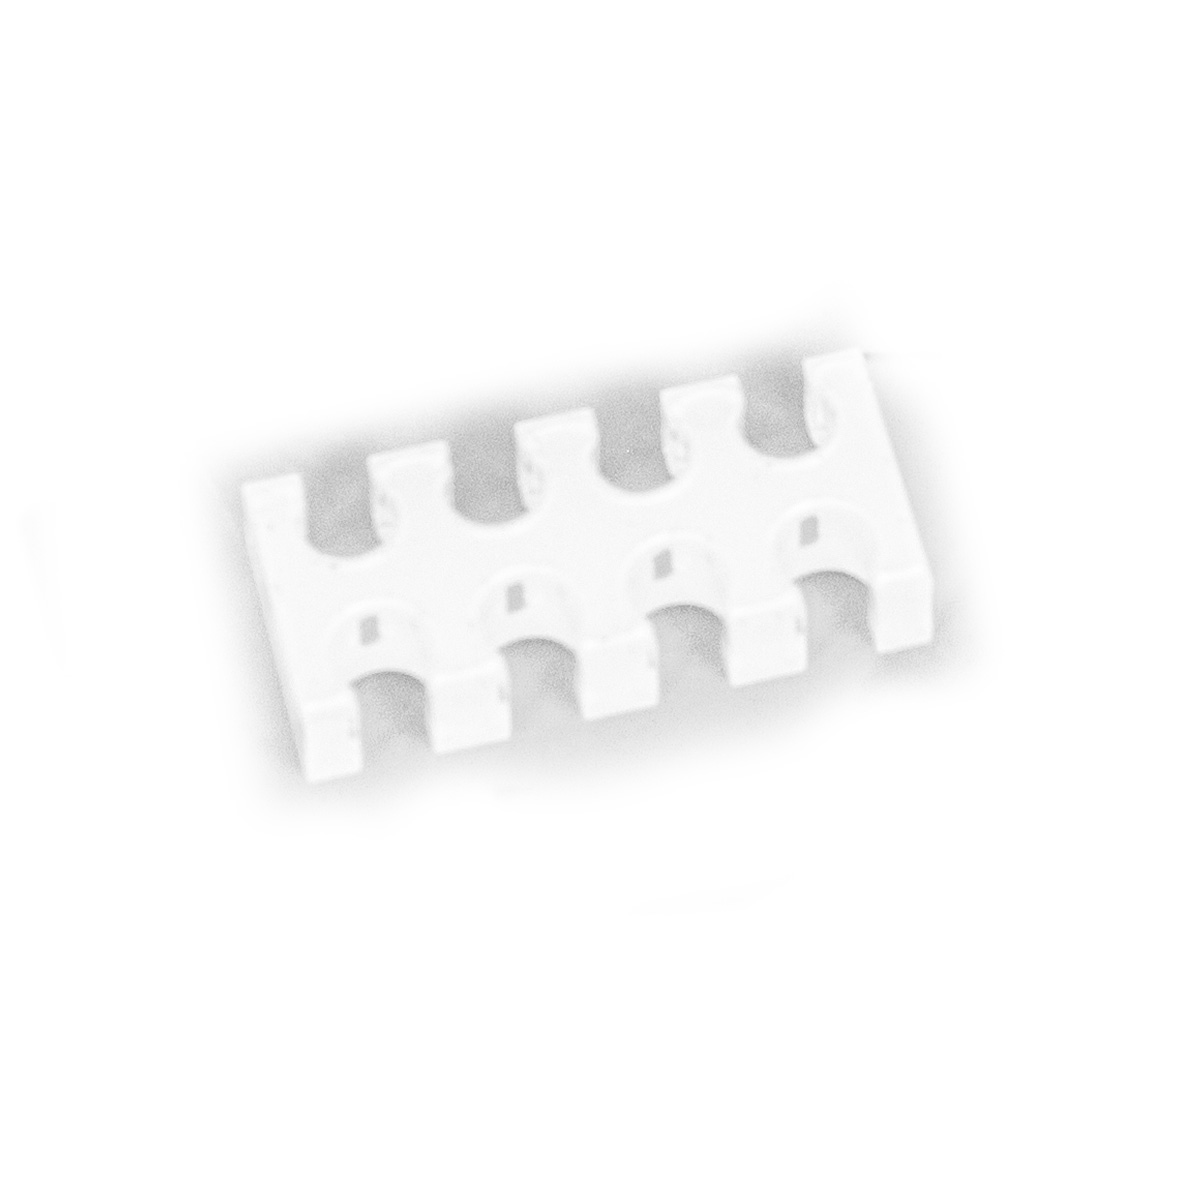 TechForge 8 Slot Cable Comb (Small) 3mm - Clear